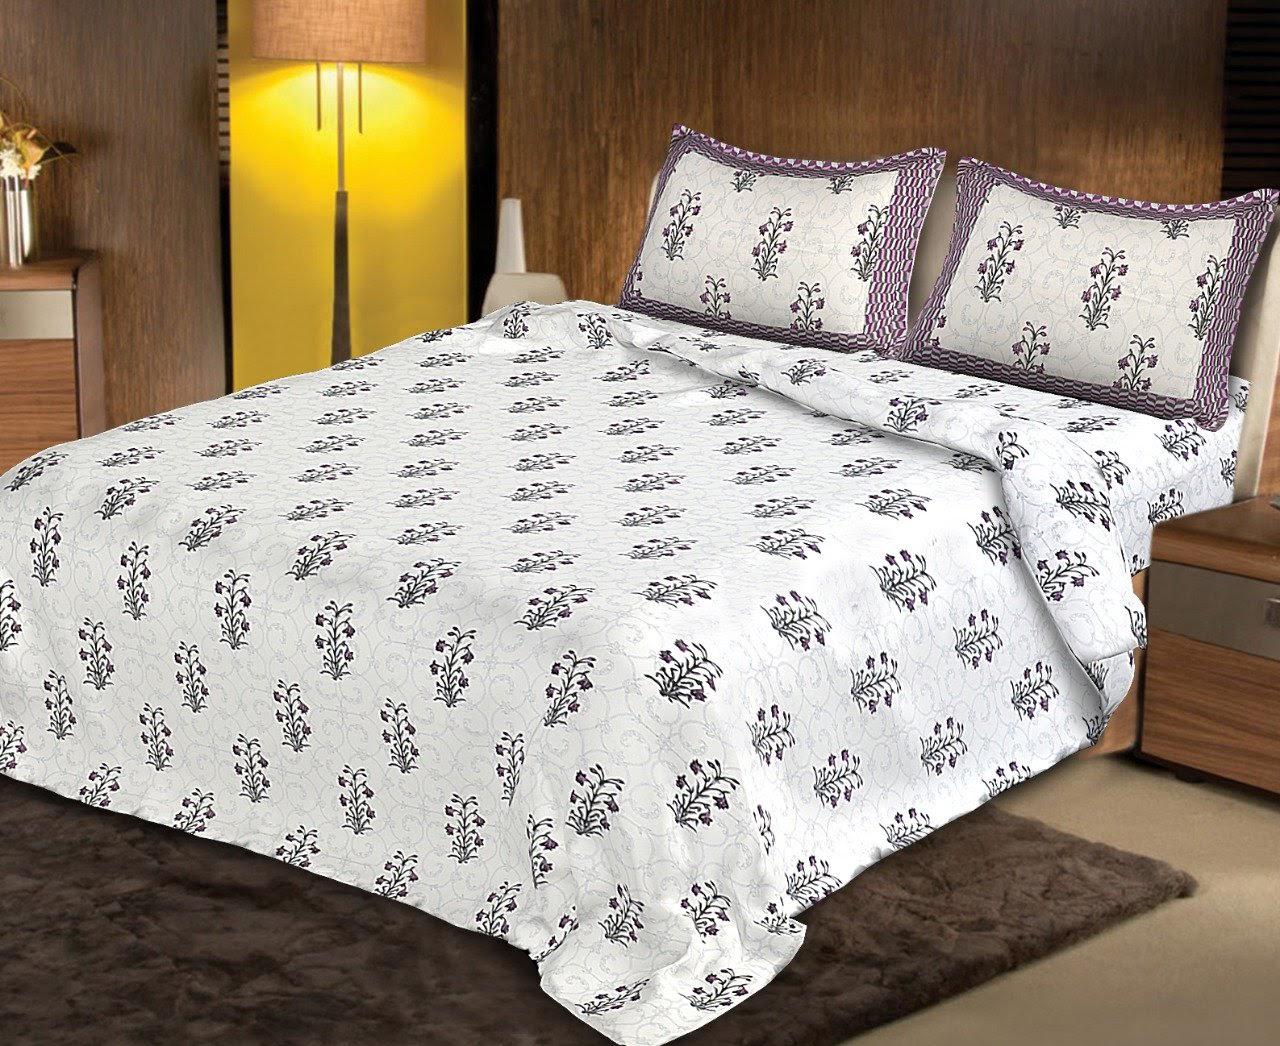 Off White purple Flower Print King Size Cotton Bed Sheet